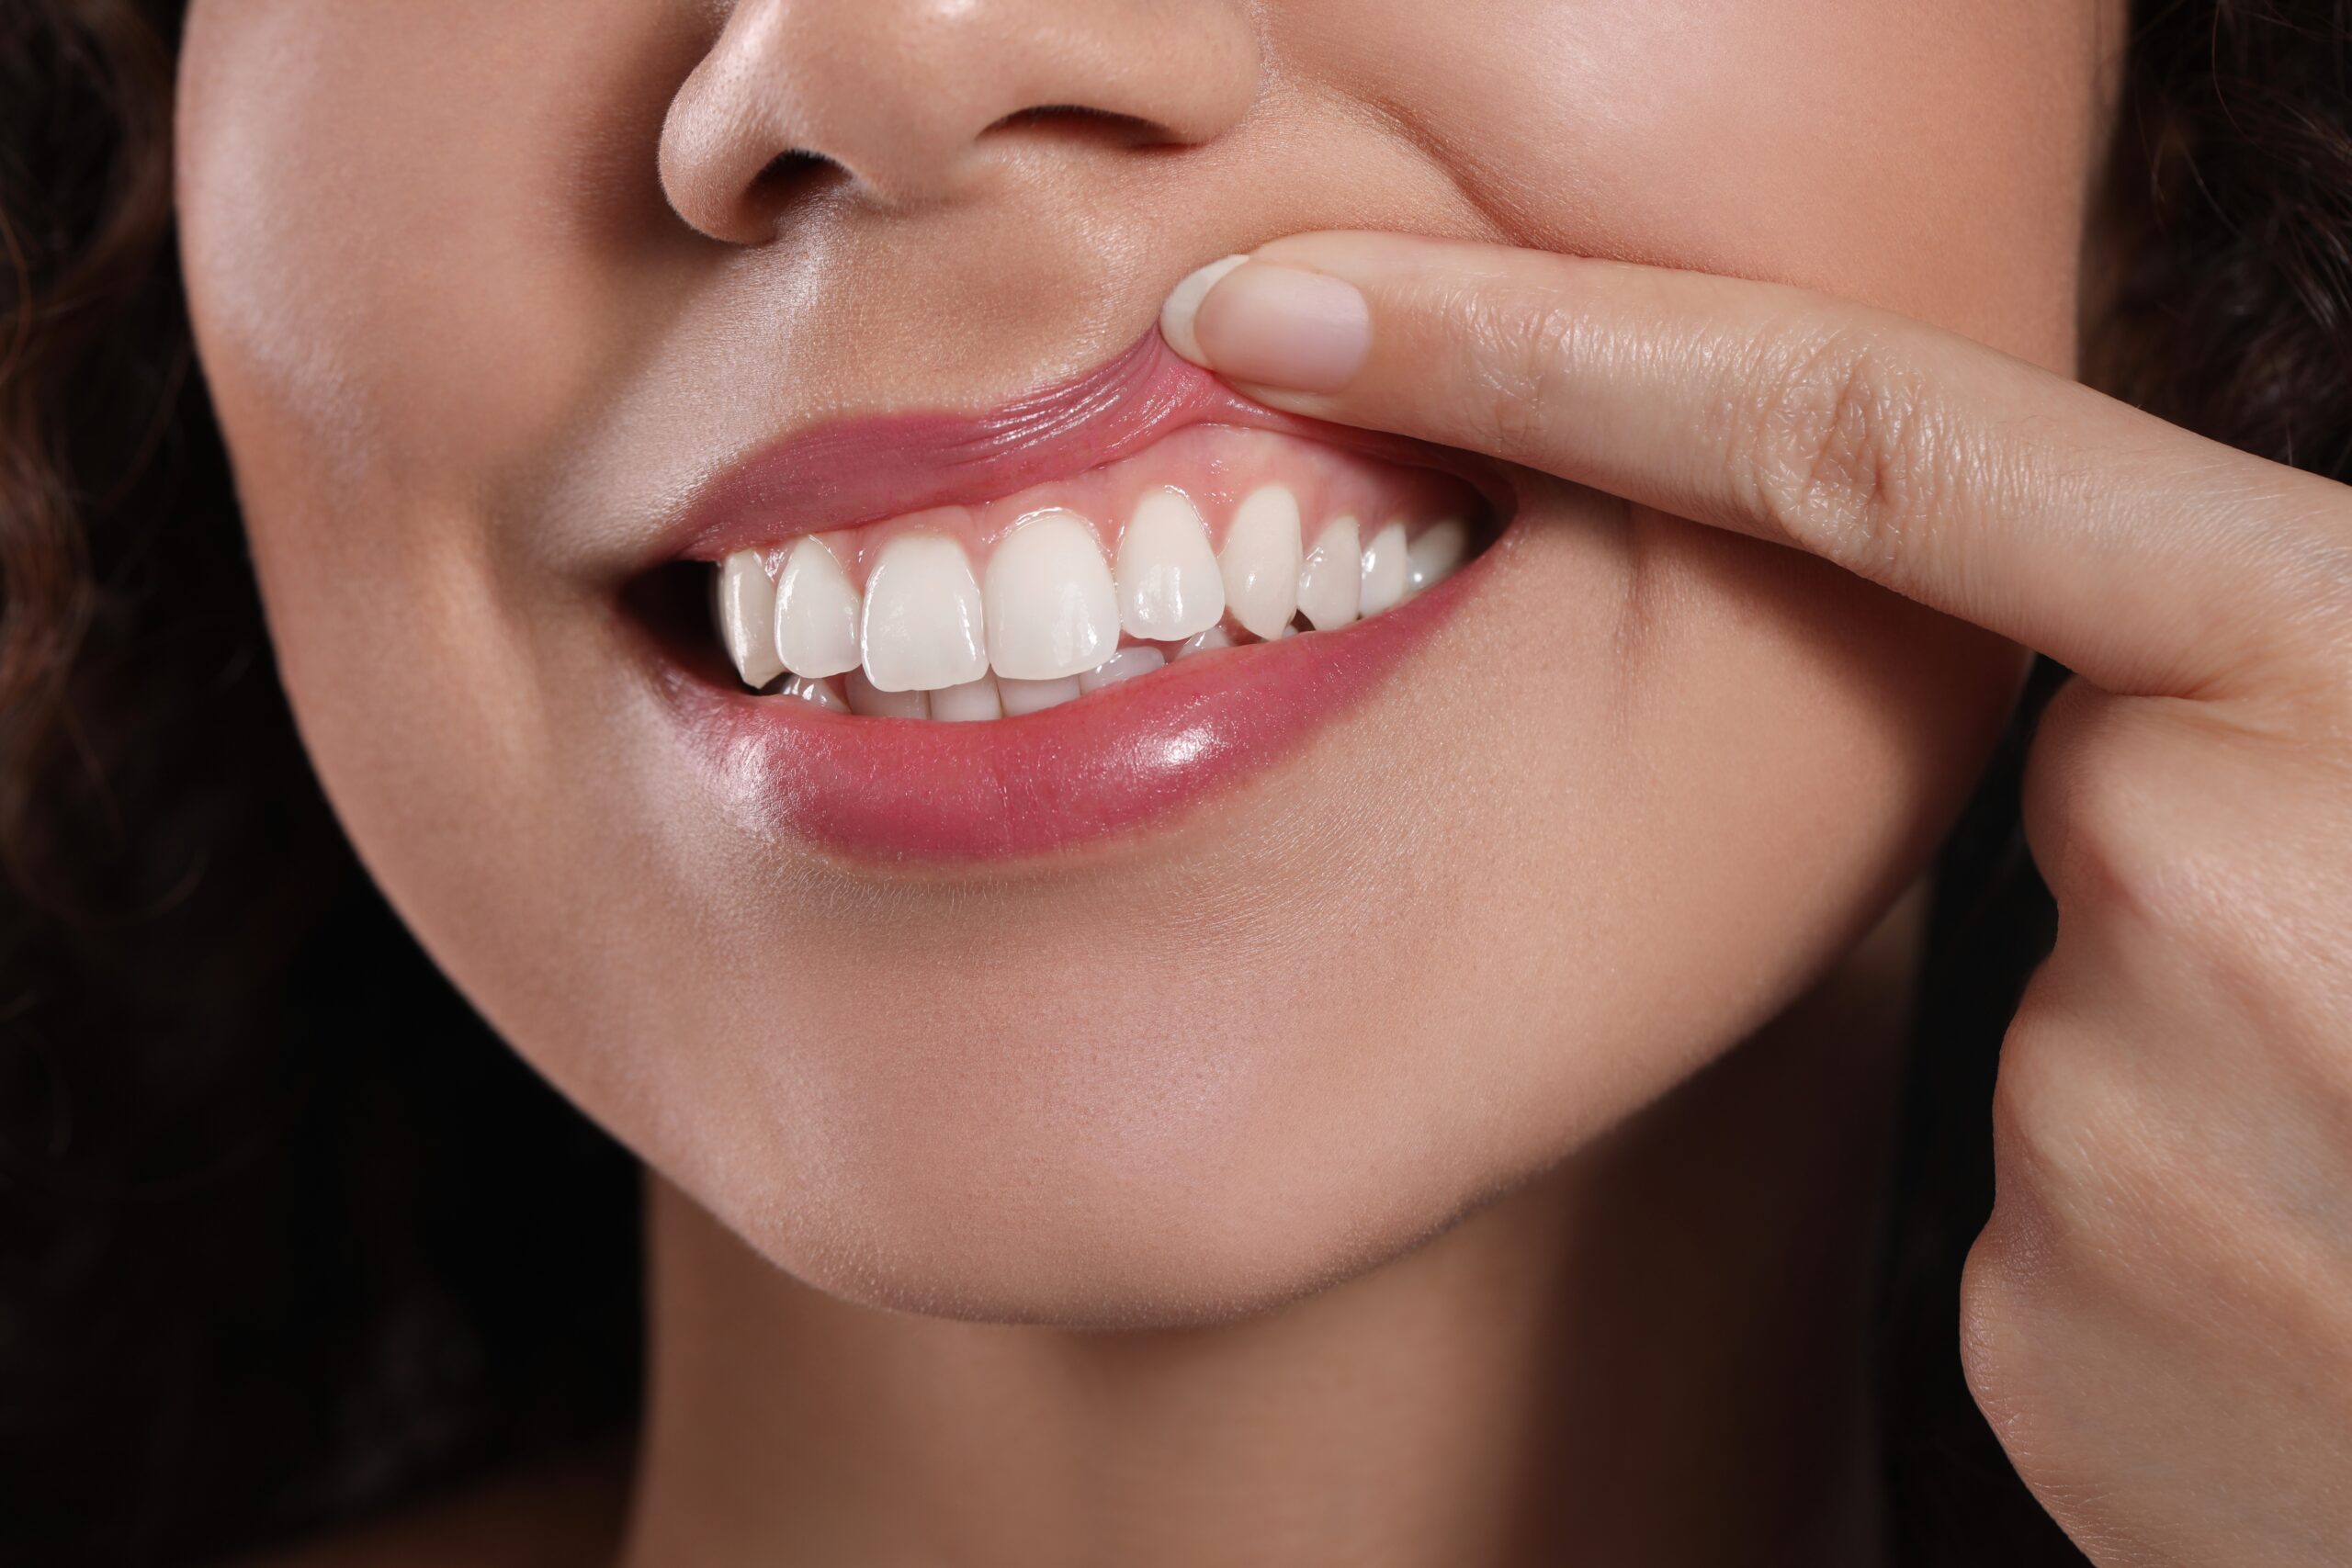 Gum Health 101: The Surprising Connections Between Your Gums and Overall Health